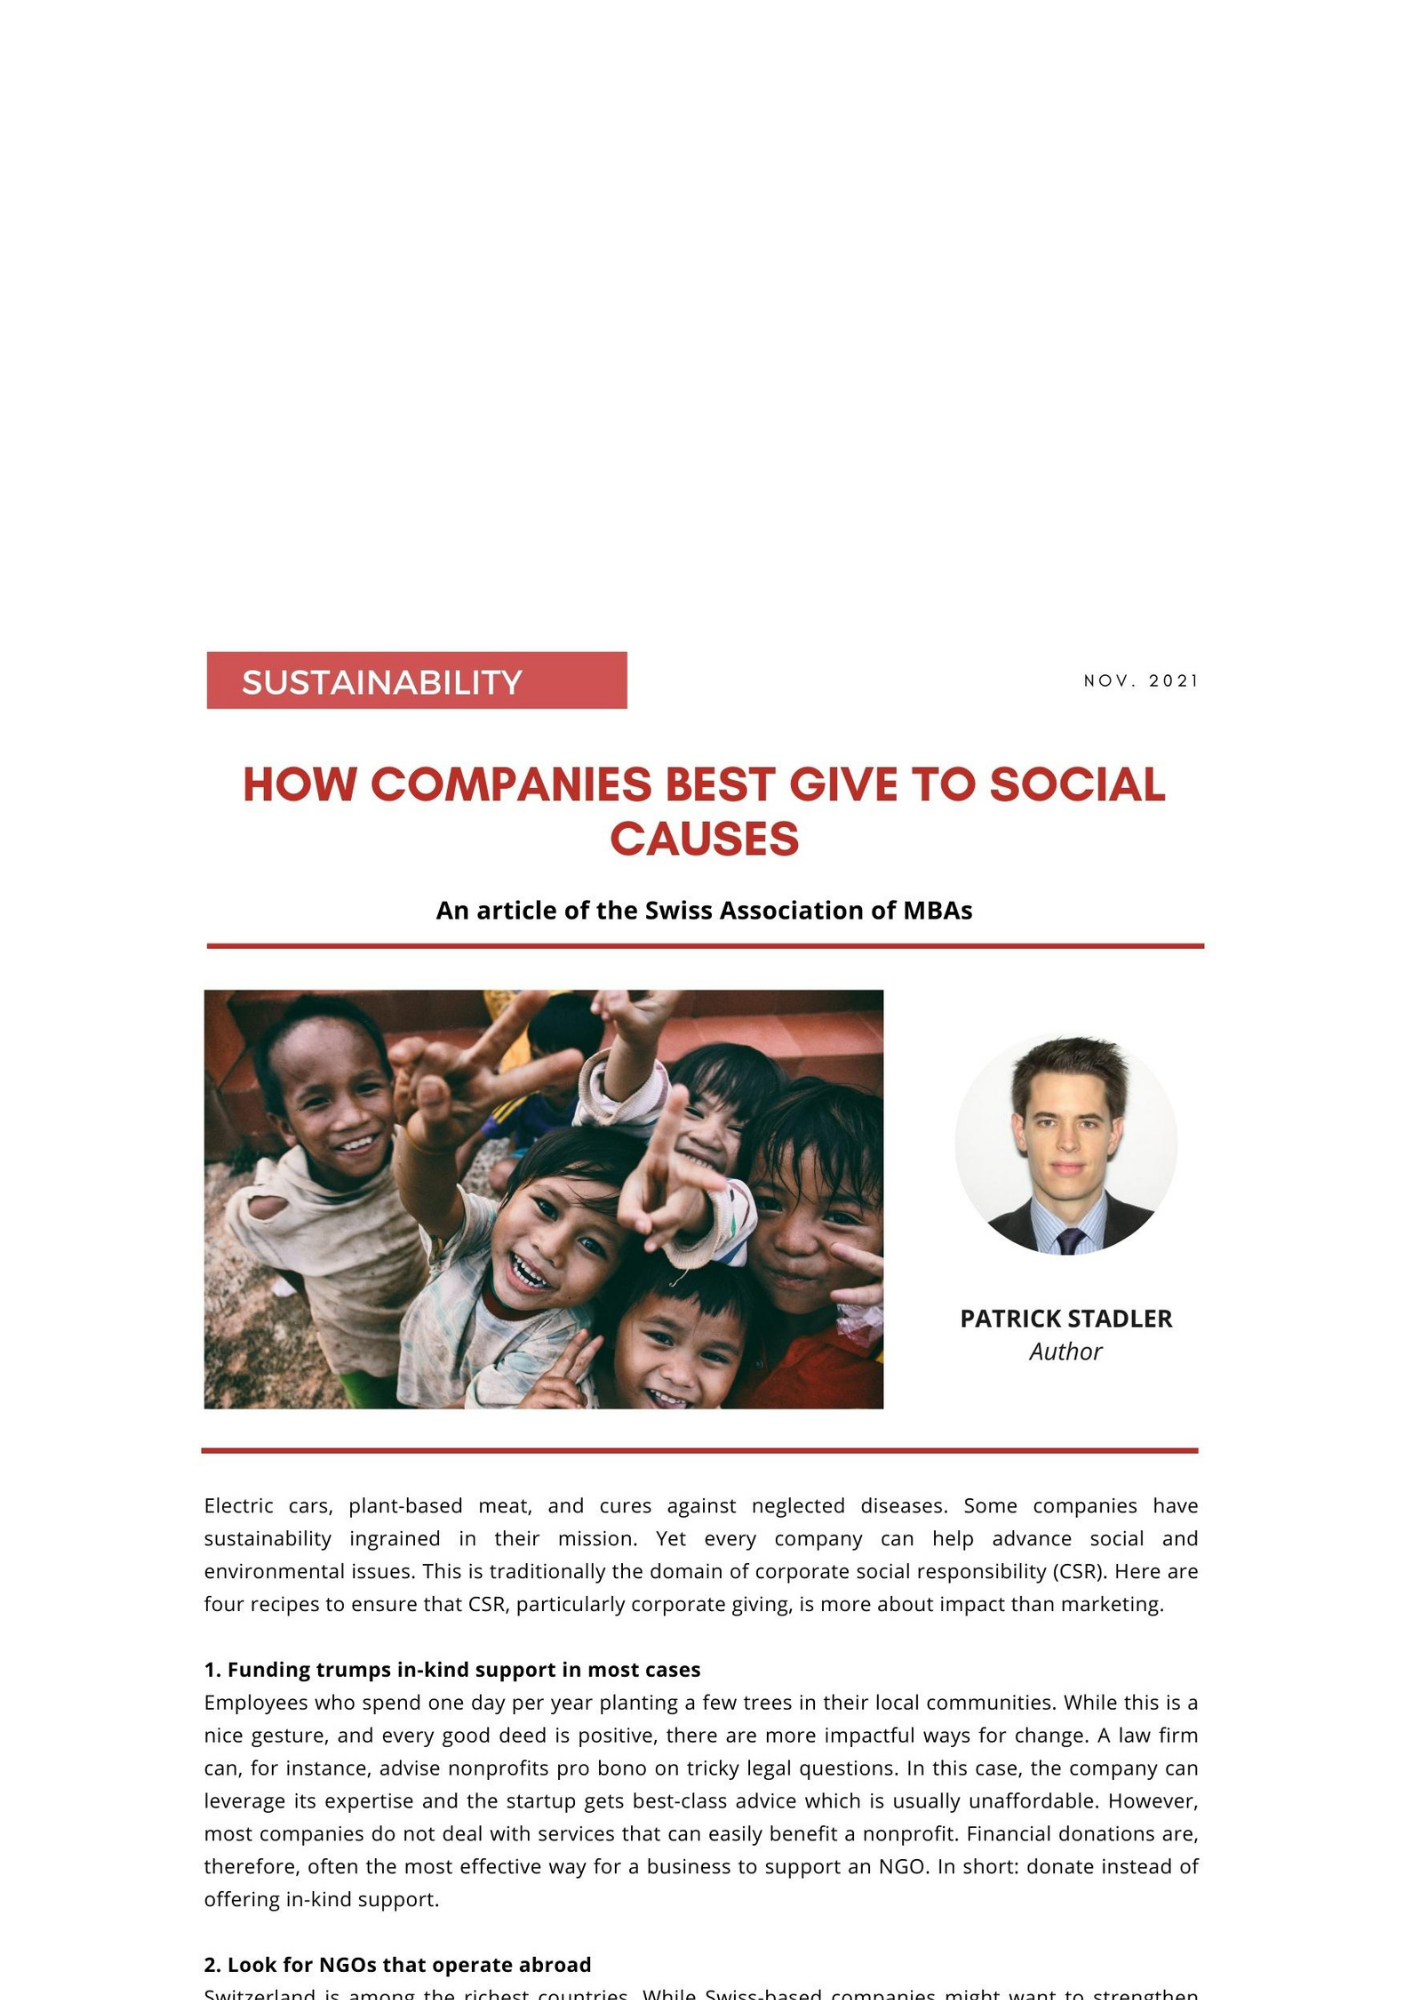 How Companies Best Give to Social Causes